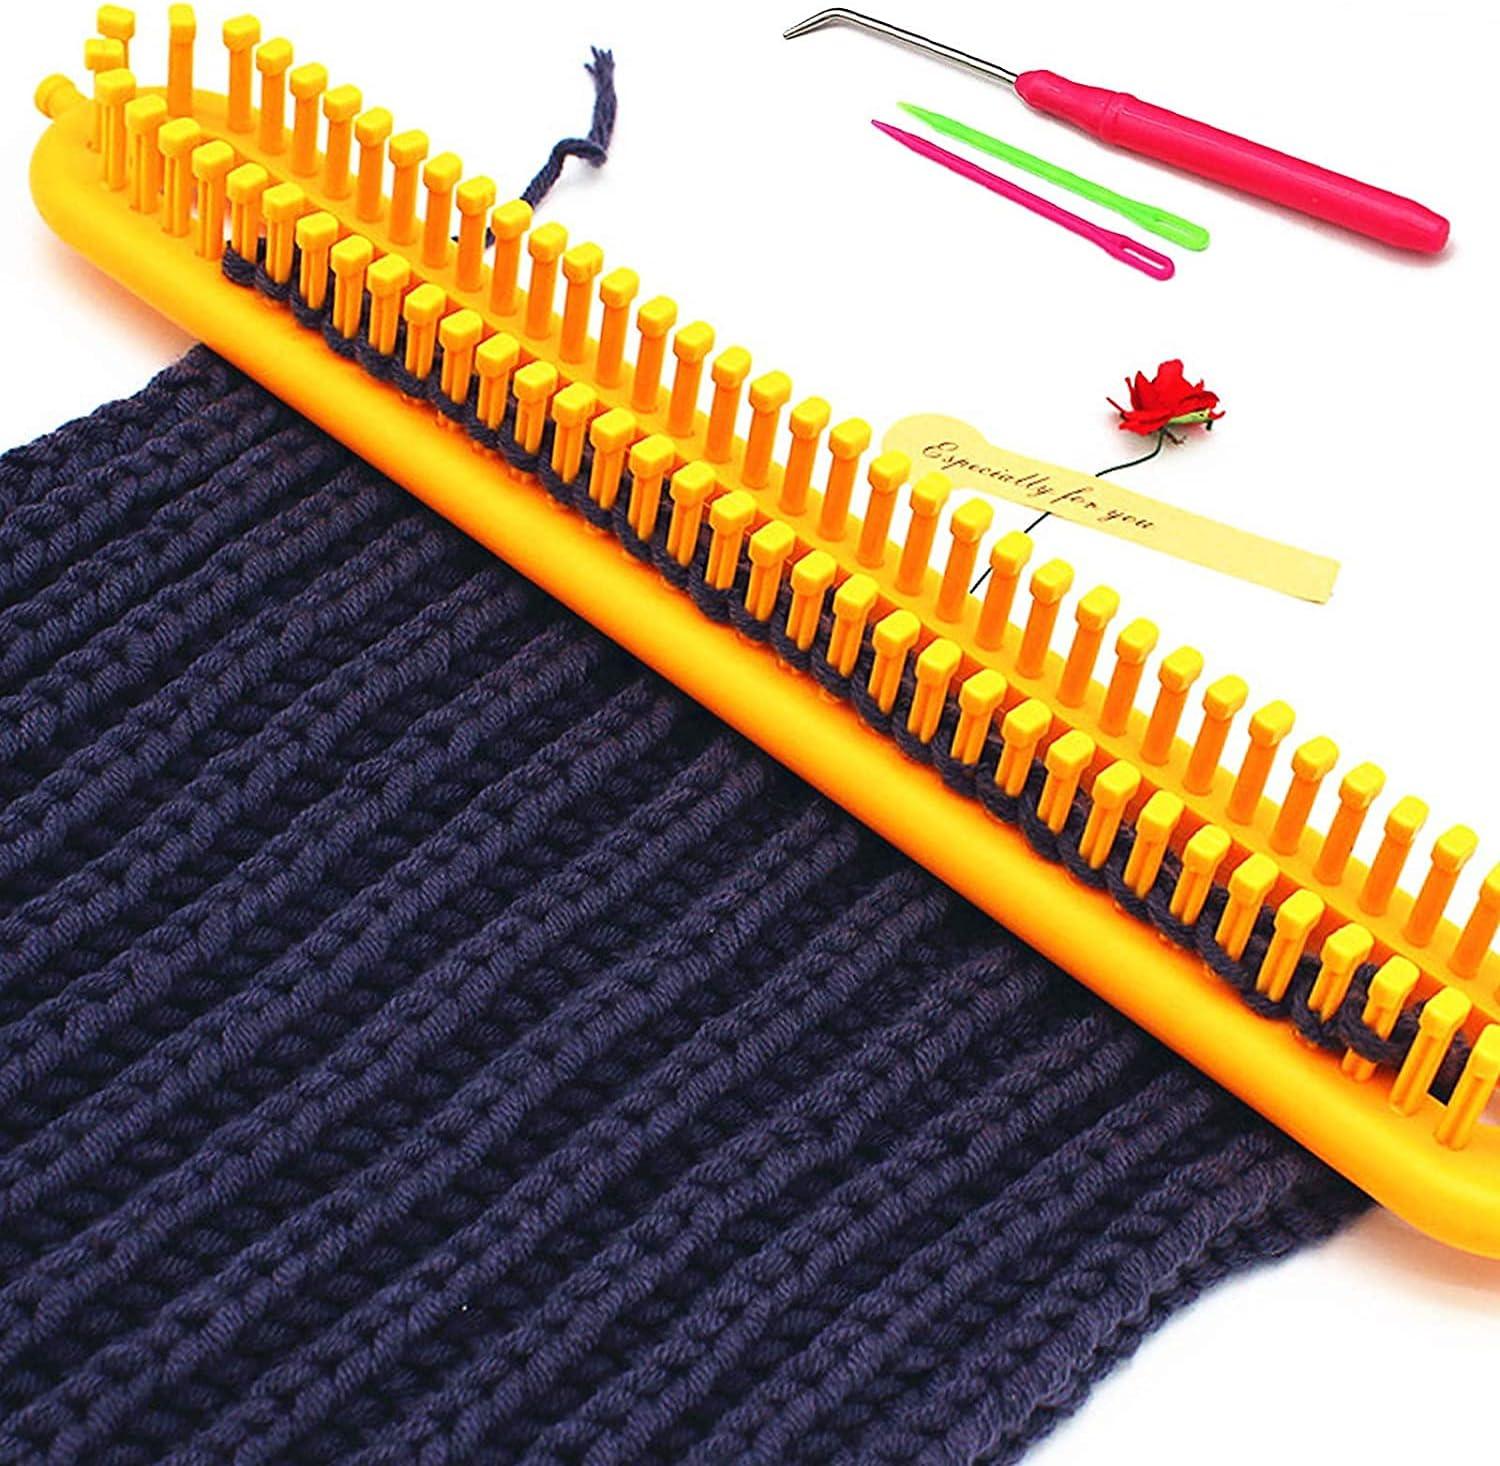  ADEALINK Scarf Knitting Looms Kit with Knitting Crochet Hooks,  Scarf Stitch Knit Weaving Tool for Beginners, Perfect for Scarf, Hat, Sock,  Shawl 58CM : Arts, Crafts & Sewing